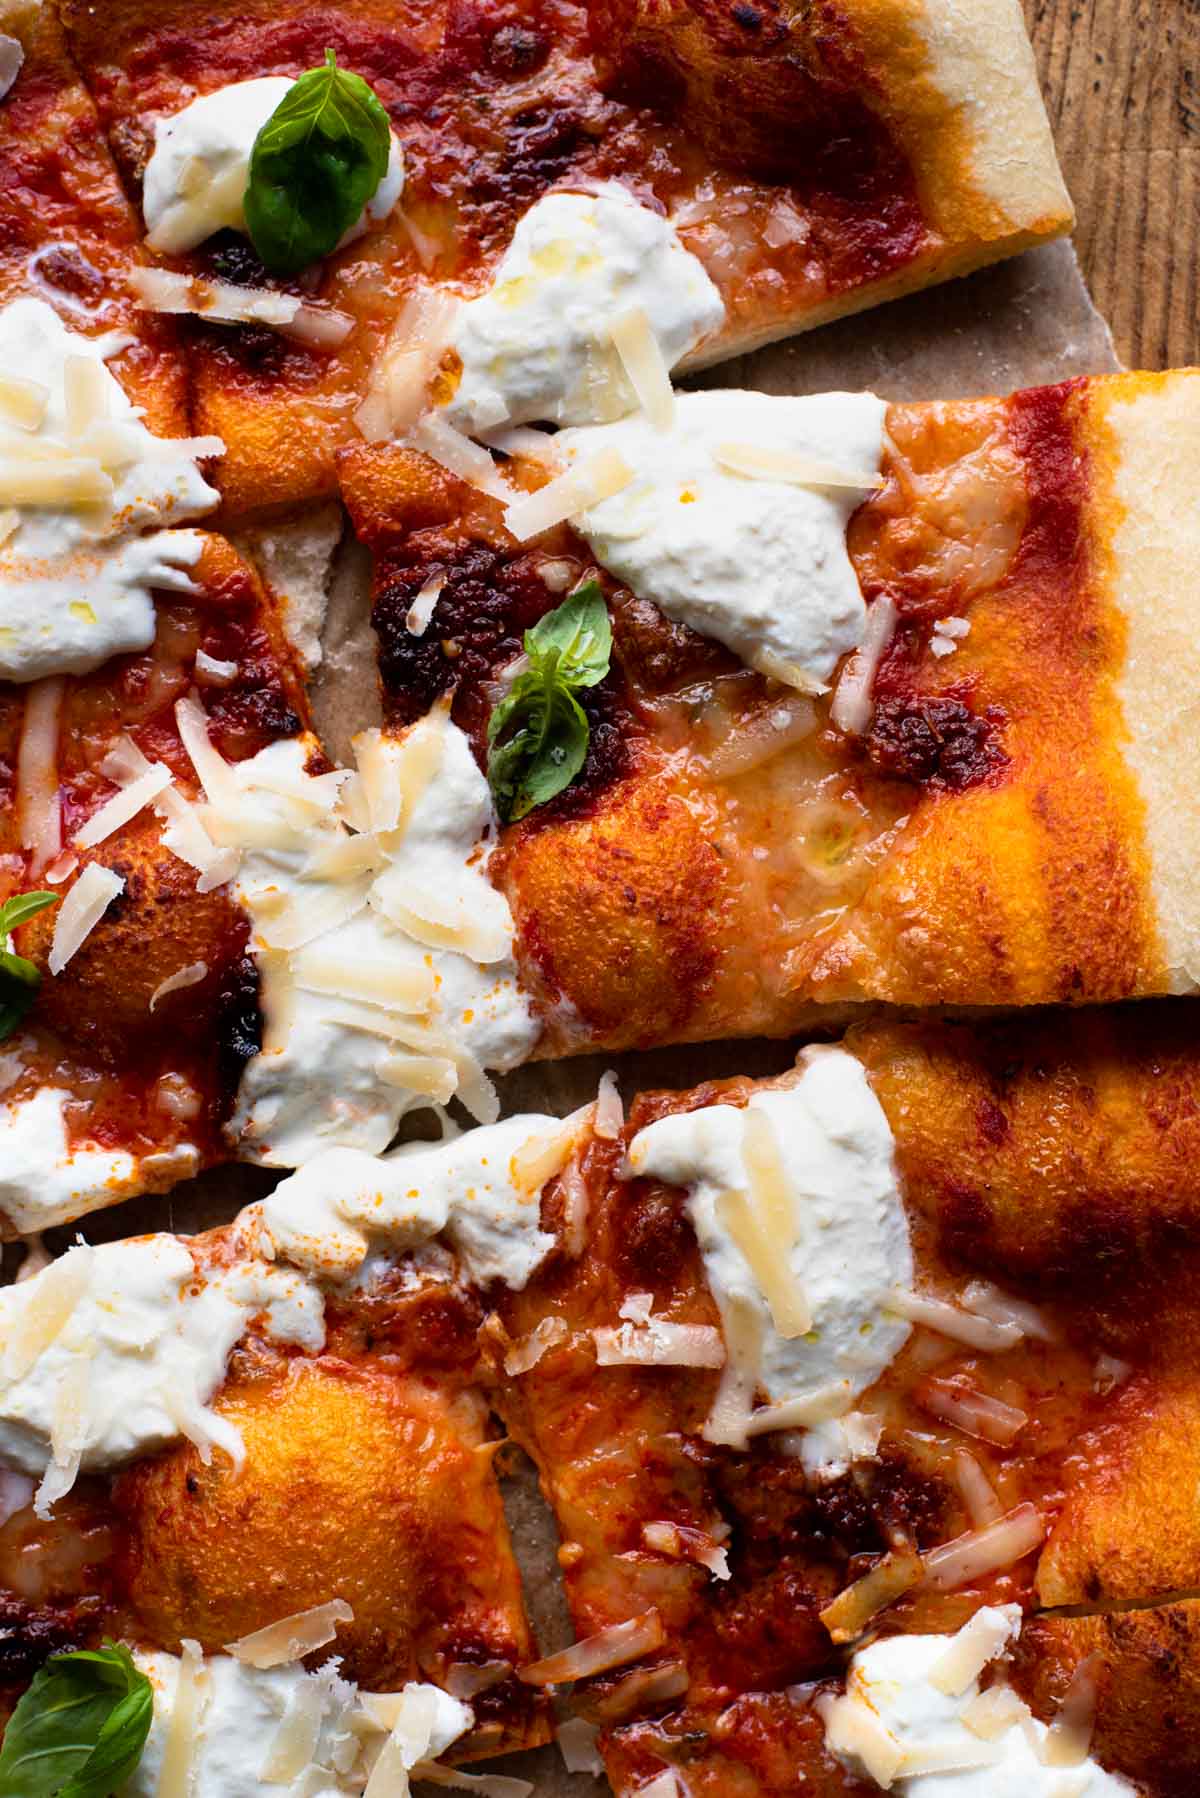 A close up of slices of pizza with Nduja and burrata cheese.